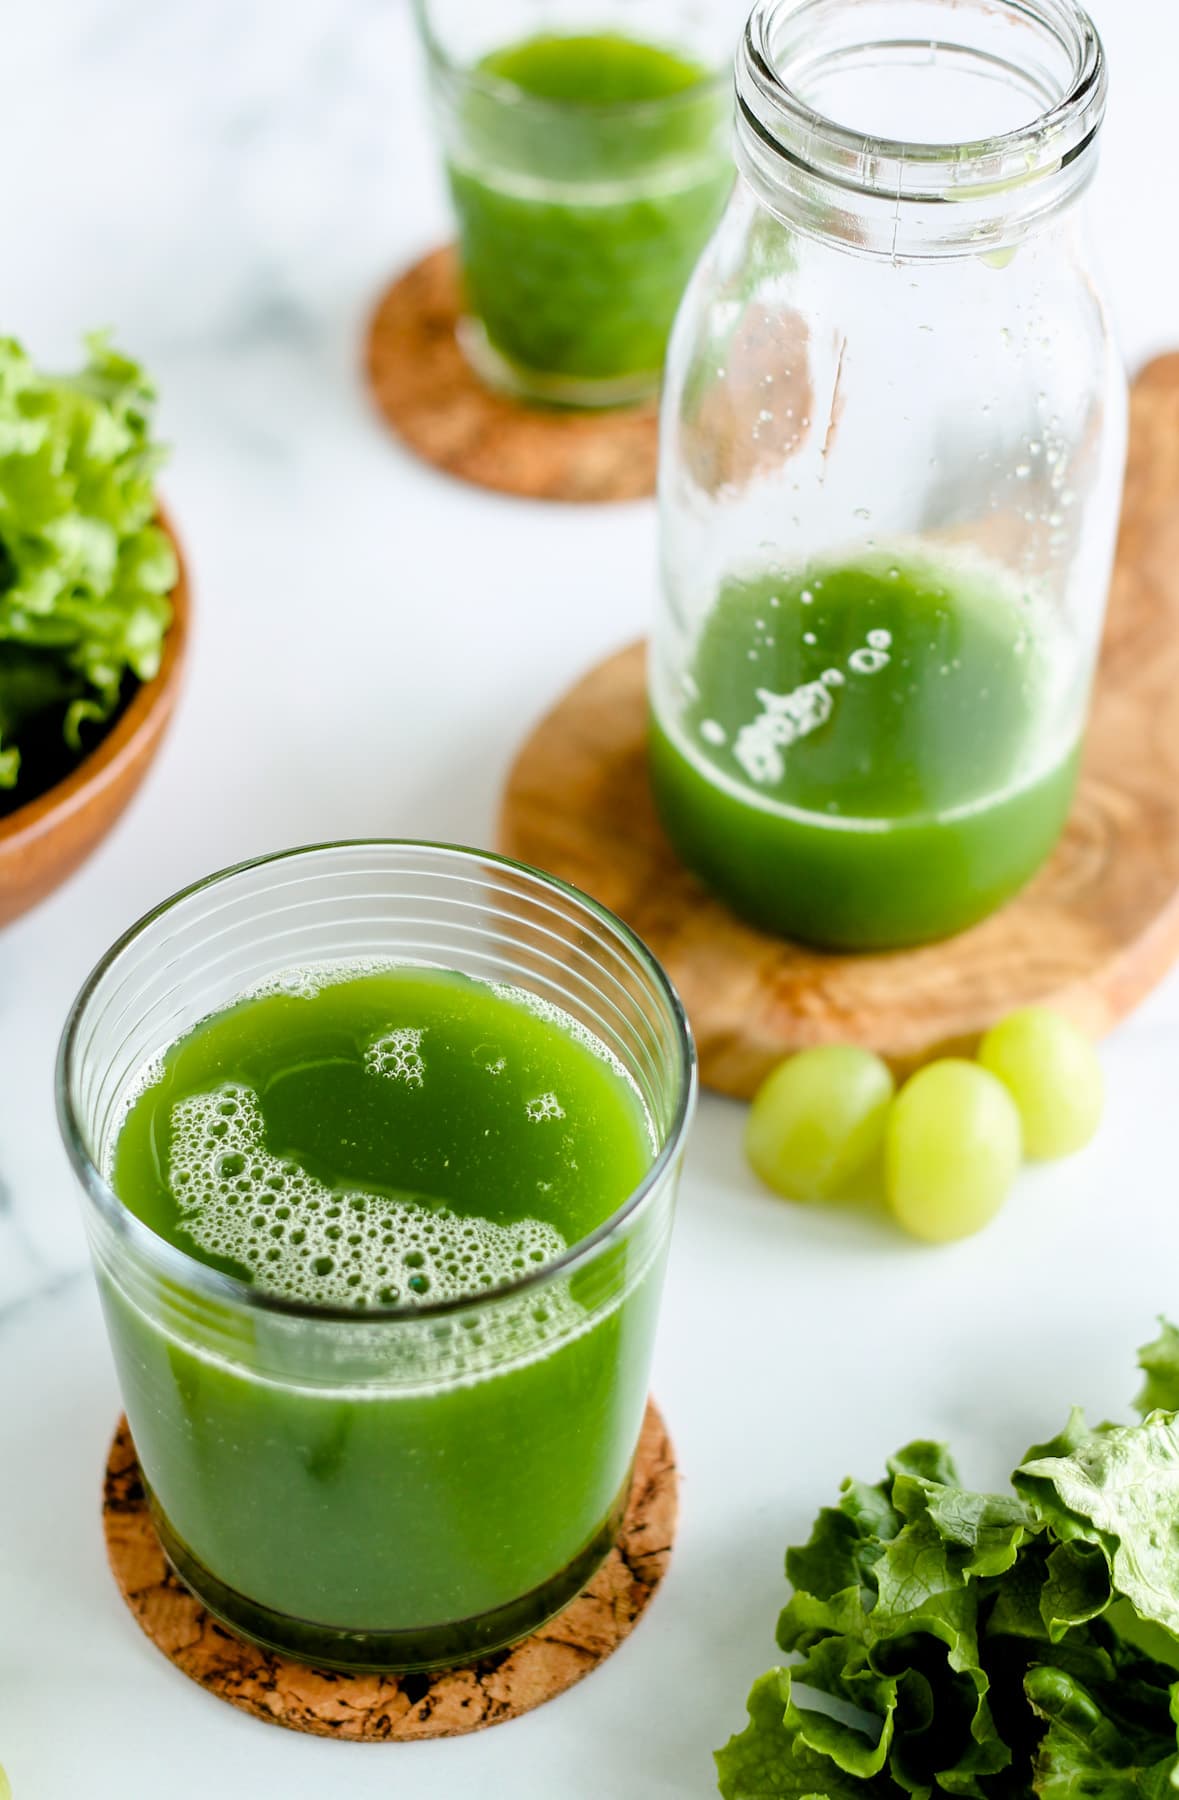 A glass of green juice.